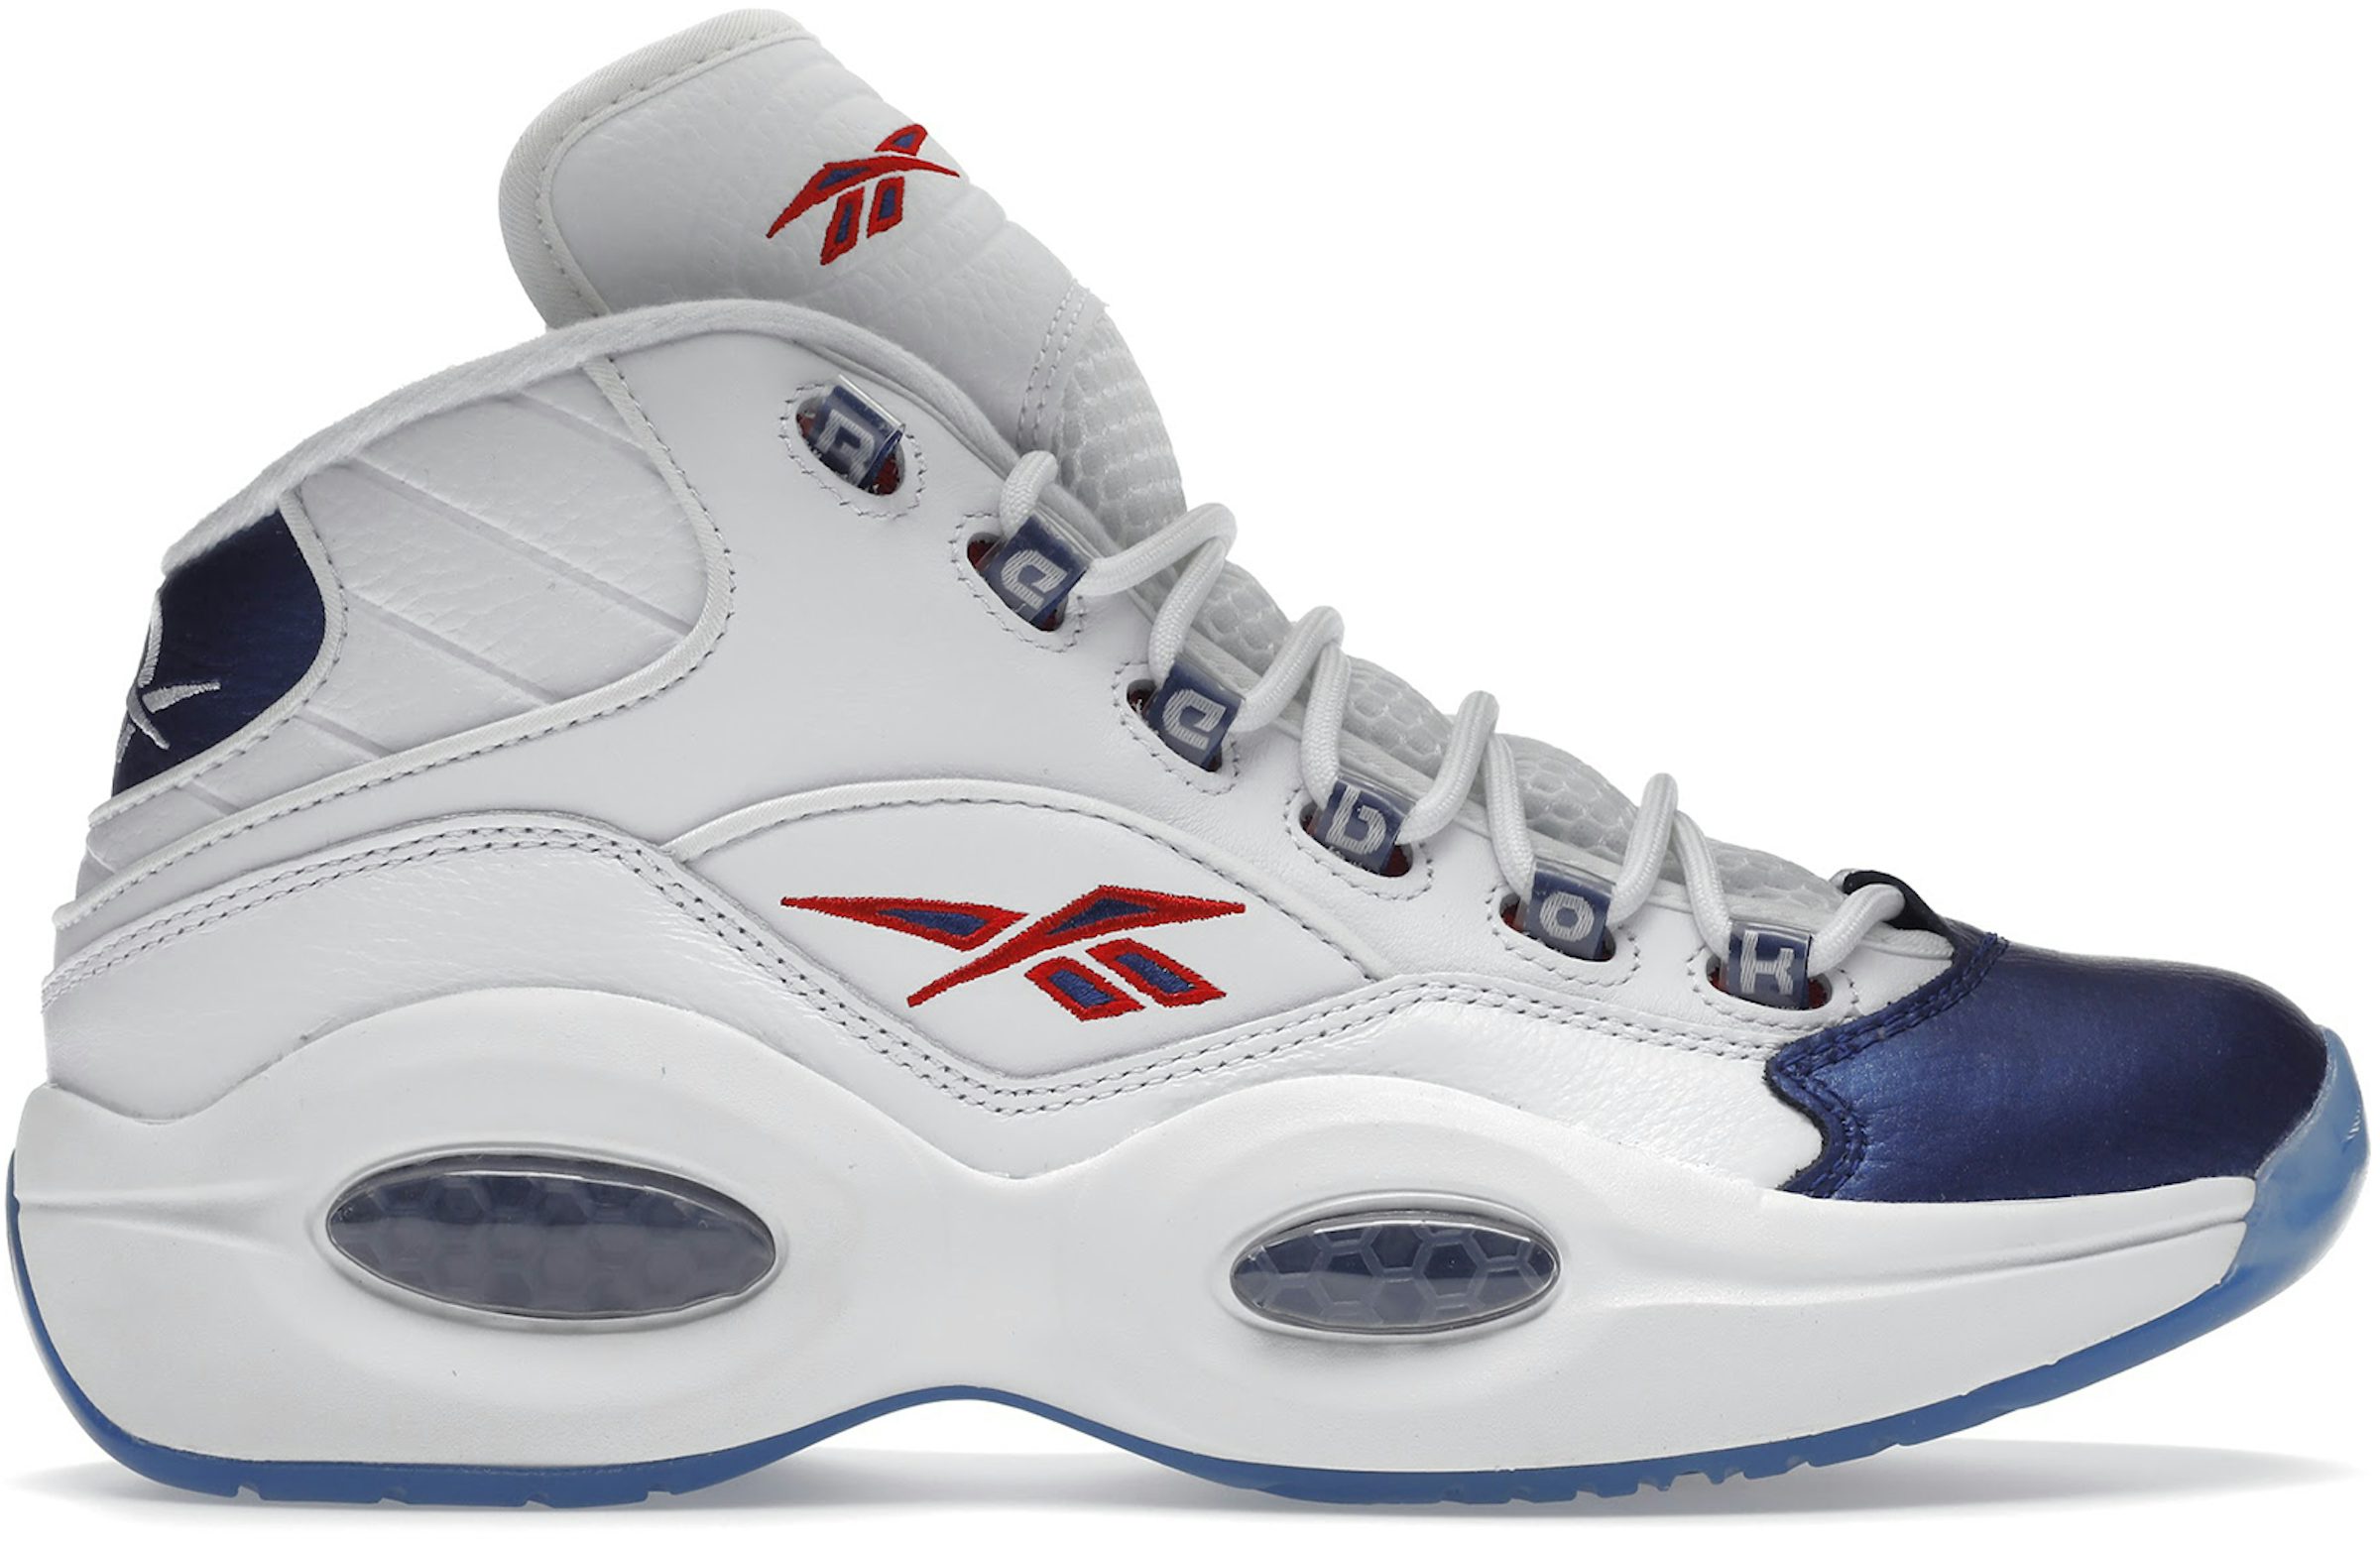 Reebok Question Mid 25 Anniversary Allen Iverson Basketball Sneakers White